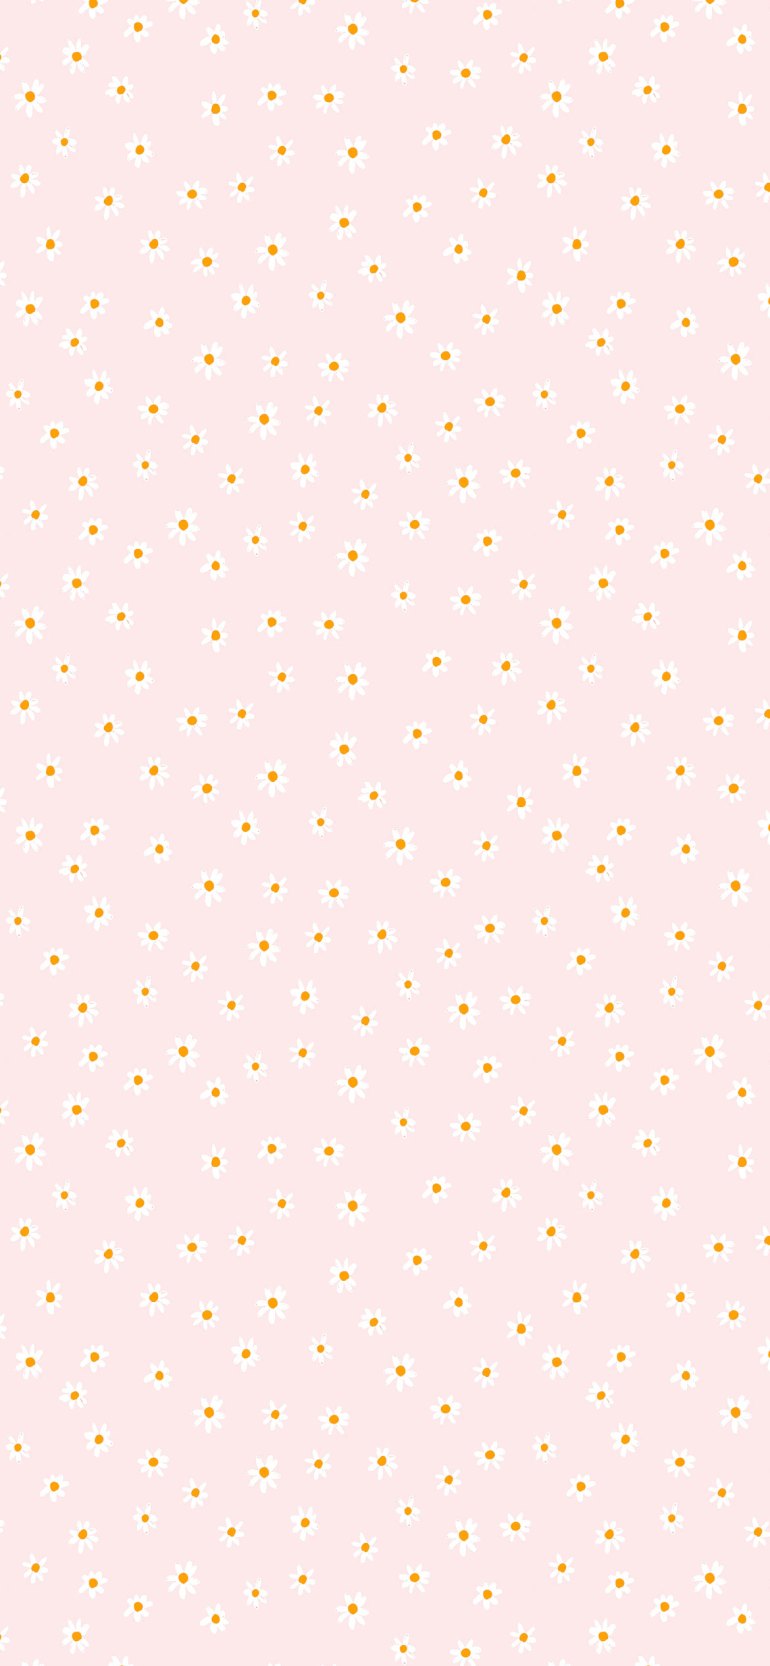 Pink Aesthetic Picture, Daisy Wallpaper for Phone Wallpaper